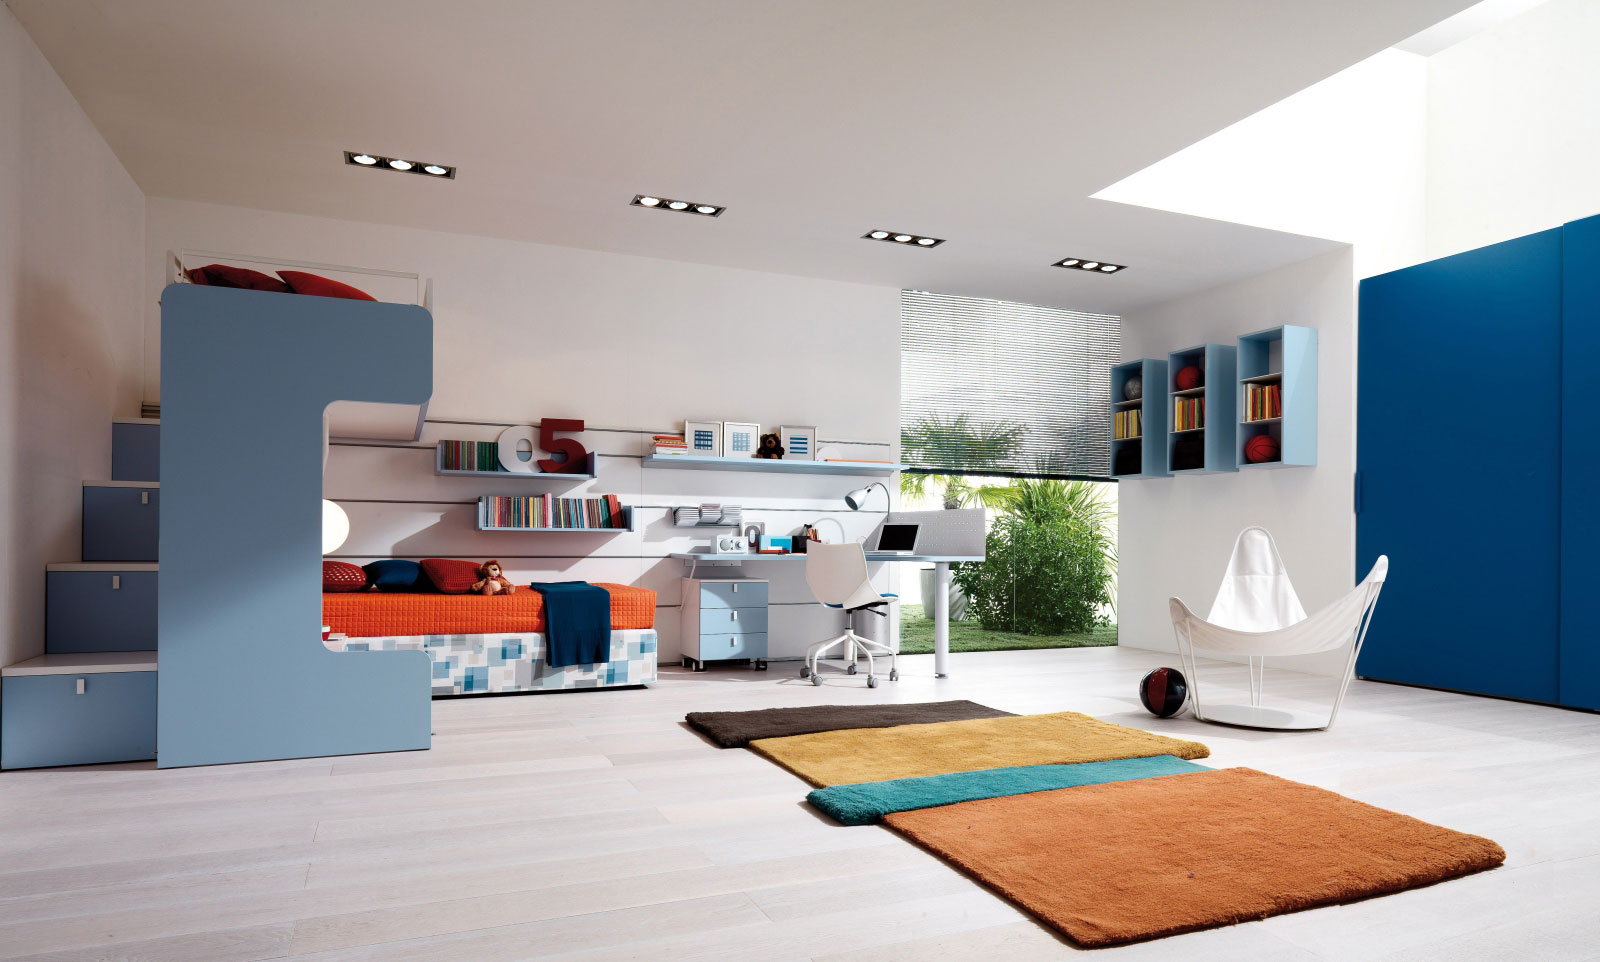 Modern Kids With Enchanting Modern Kids Bedroom Furnished With Orange Single Bed And Wall Cabinets Of Cool Kids Rooms Also Completed With Desk Plus Chair And Thick Rugs Kids Room Desire Behind The Creation Of Cool Kids Rooms